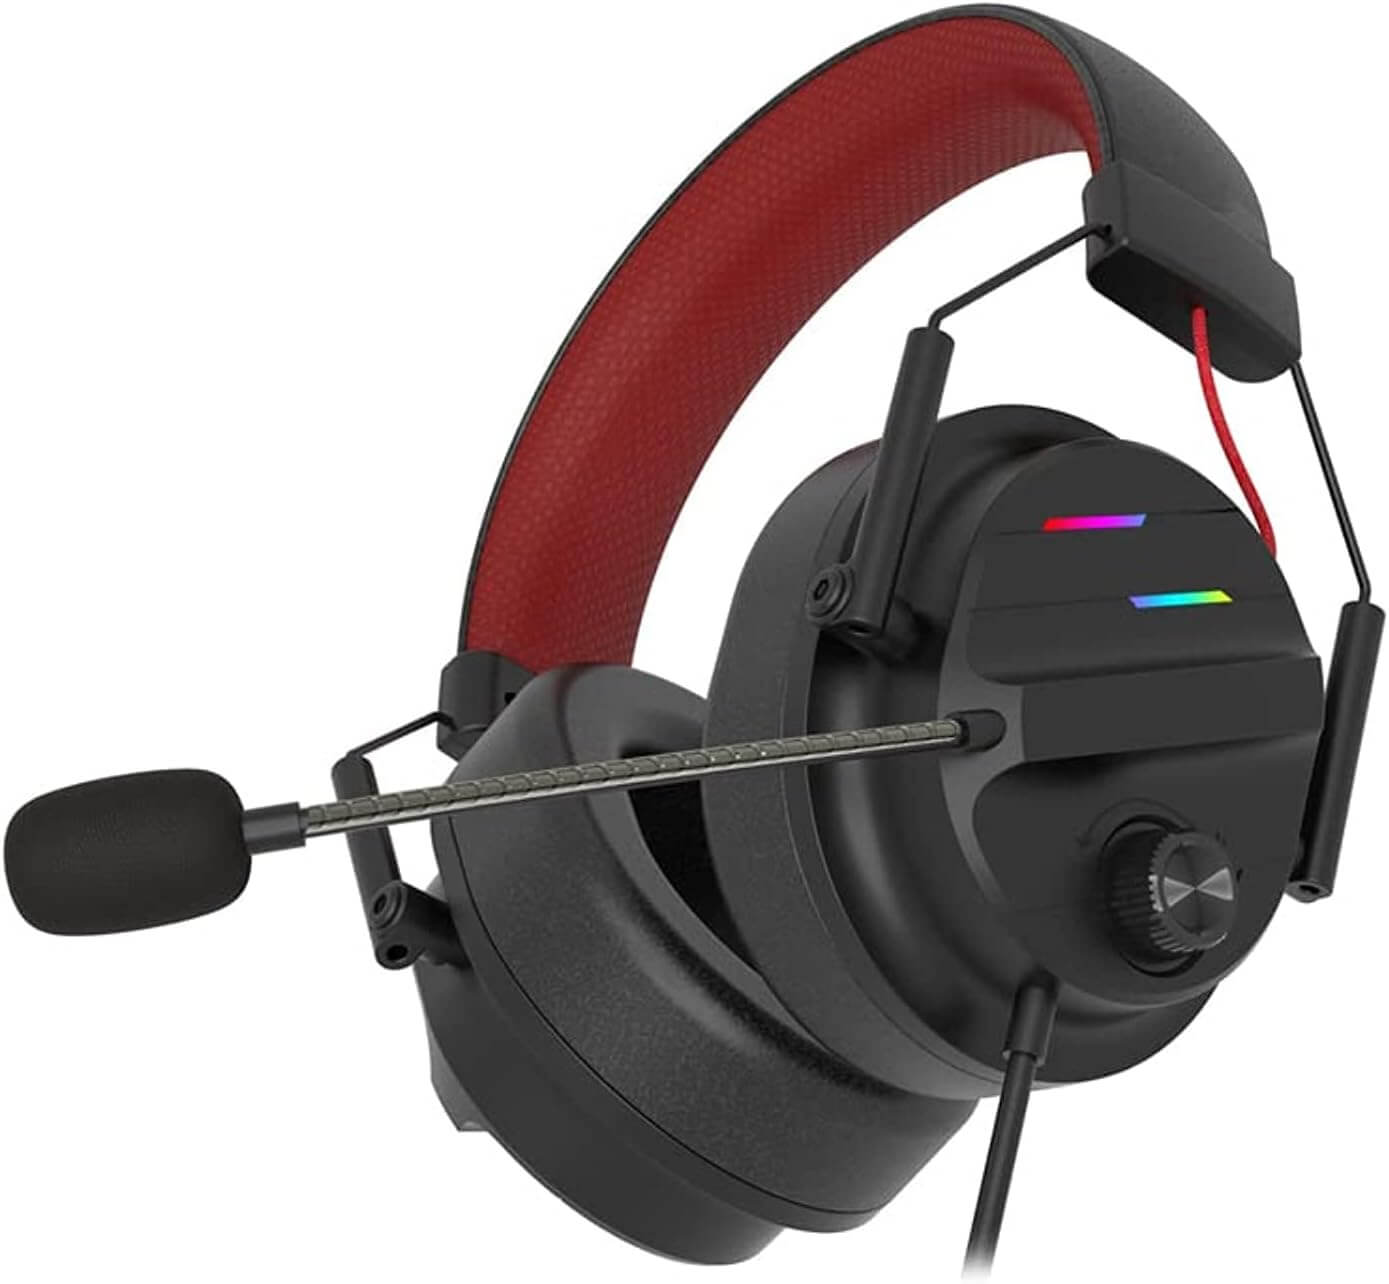 Redragon H380 Chiron USB Gaming Headset - RGB lighted Virtual Surround Sound 7.1 - Noise Cancelation Microphone